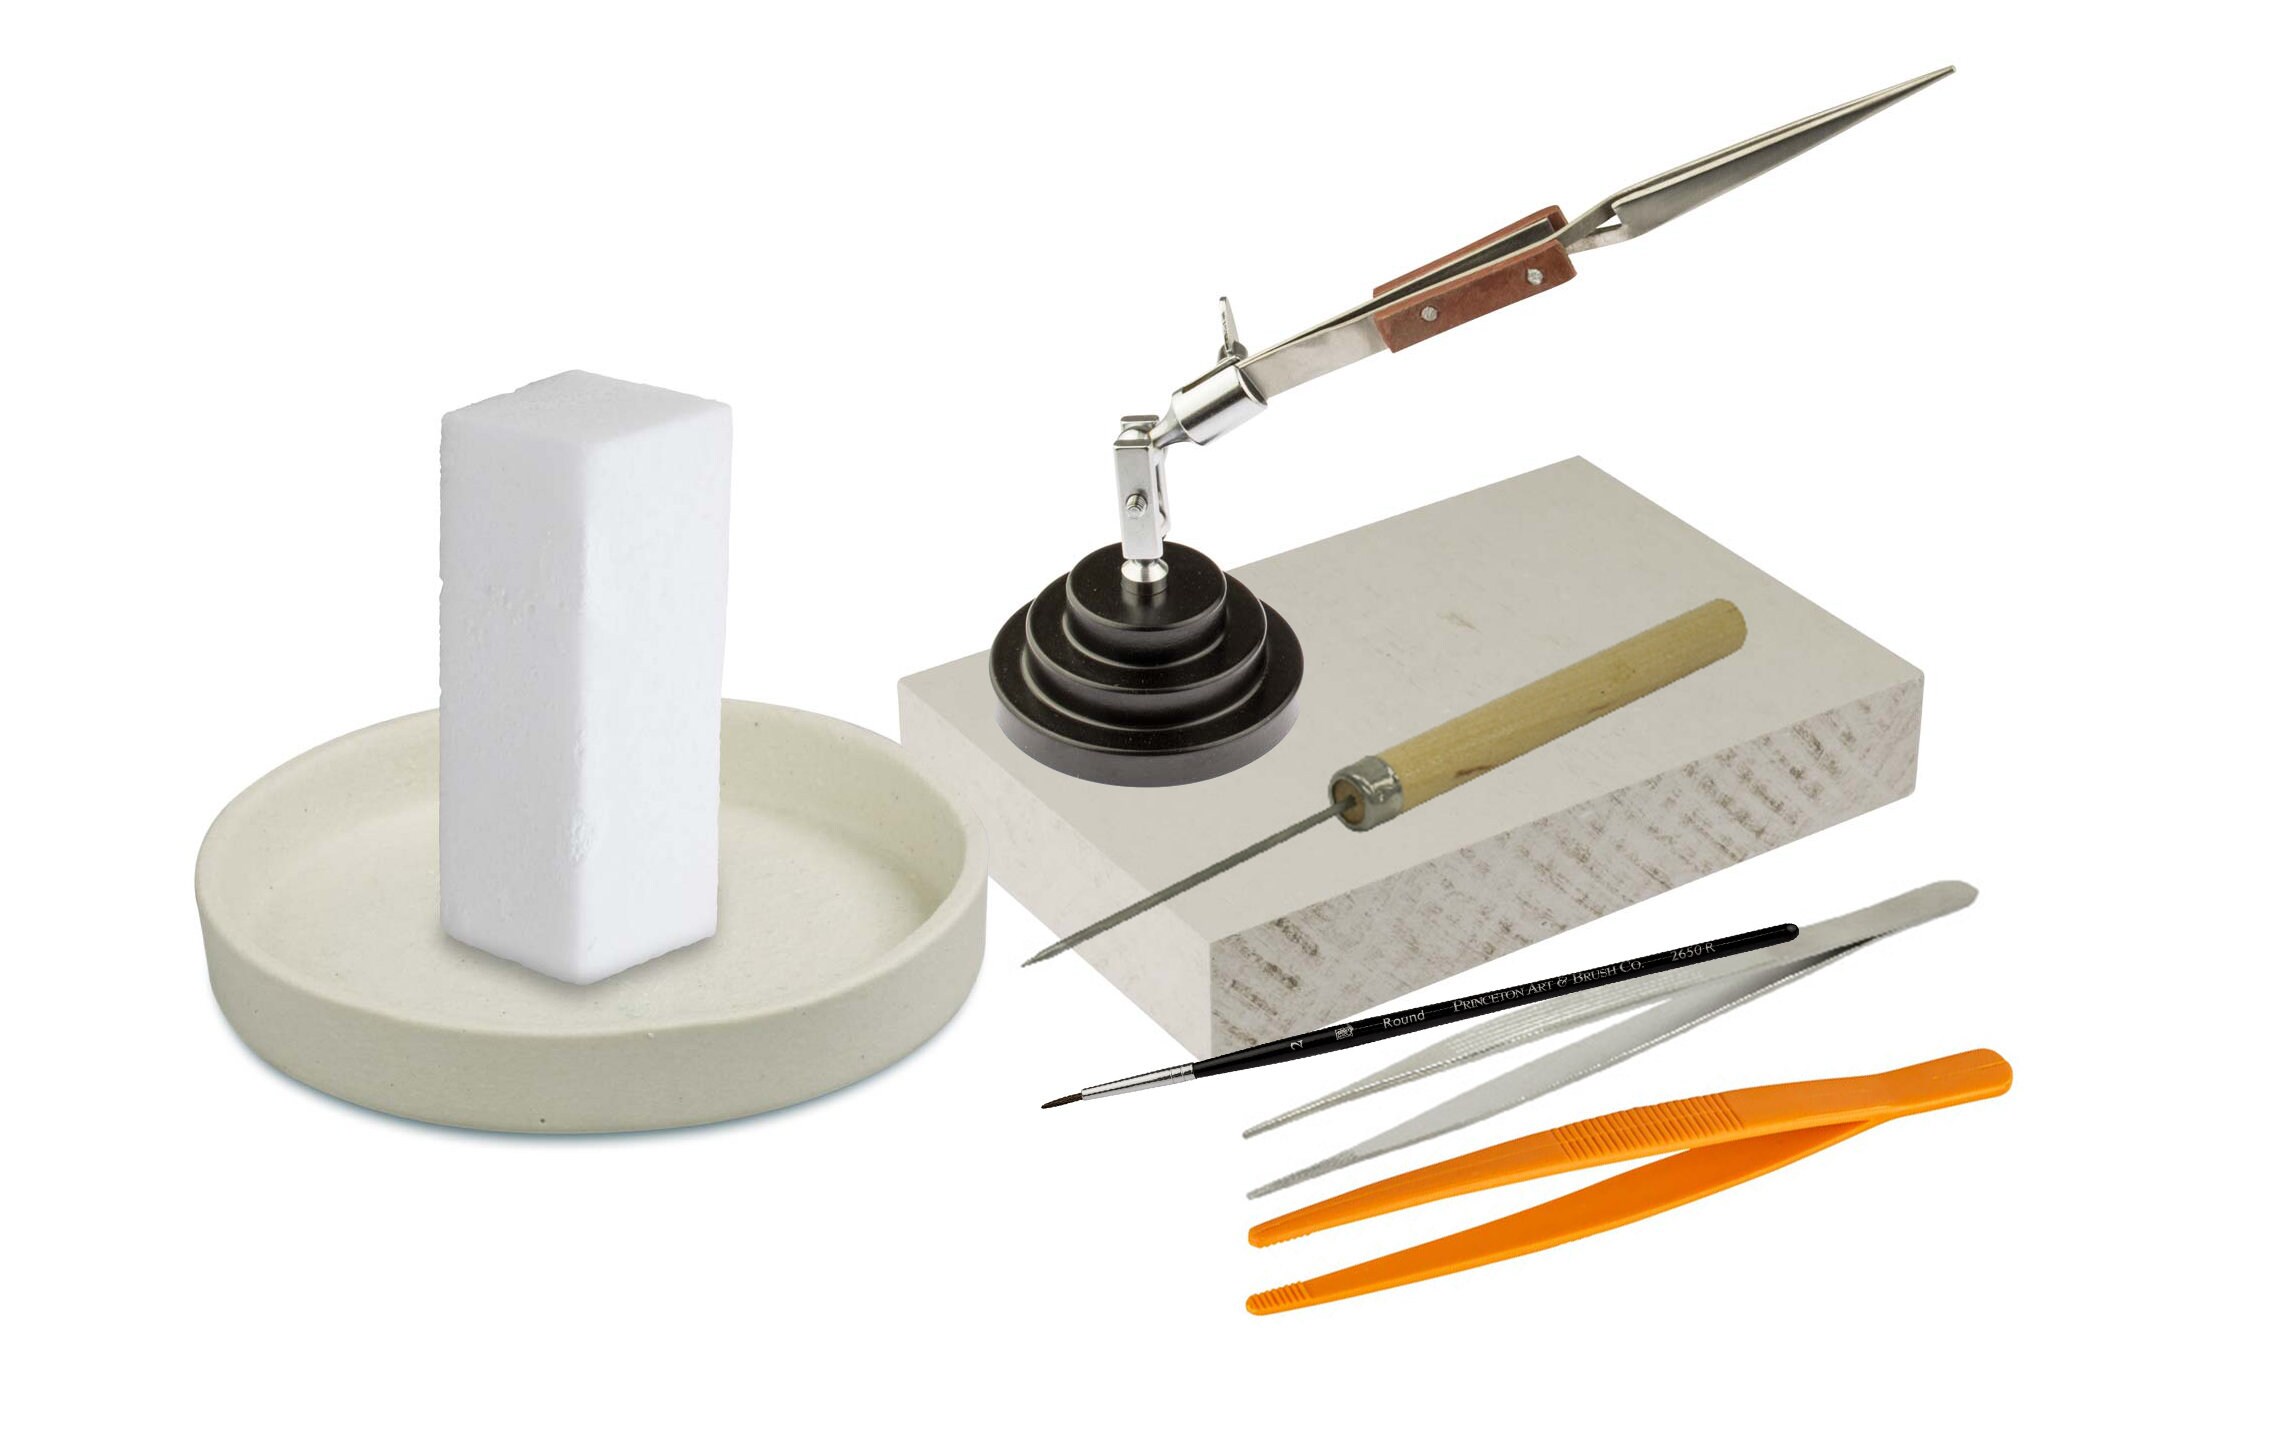 Jewelry Soldering Kit with Soldering Paste and Butane Torch - Kit-1780